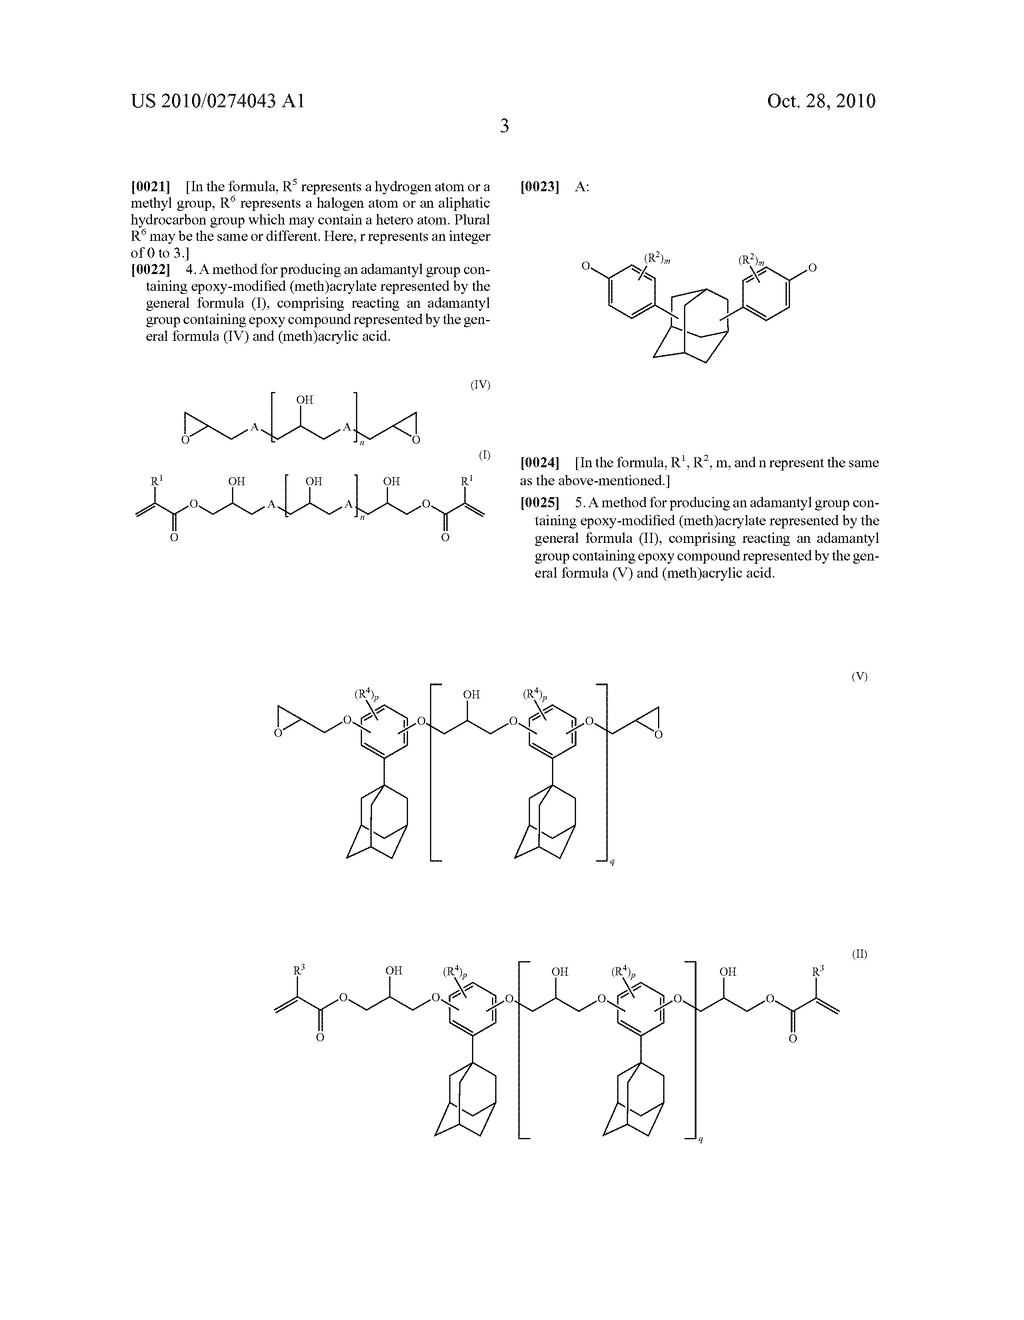 ADAMANTYL GROUP-CONTAINING EPOXY-MODIFIED (METH)ACRYLATE AND RESIN COMPOSITION CONTAINING THE SAME - diagram, schematic, and image 04